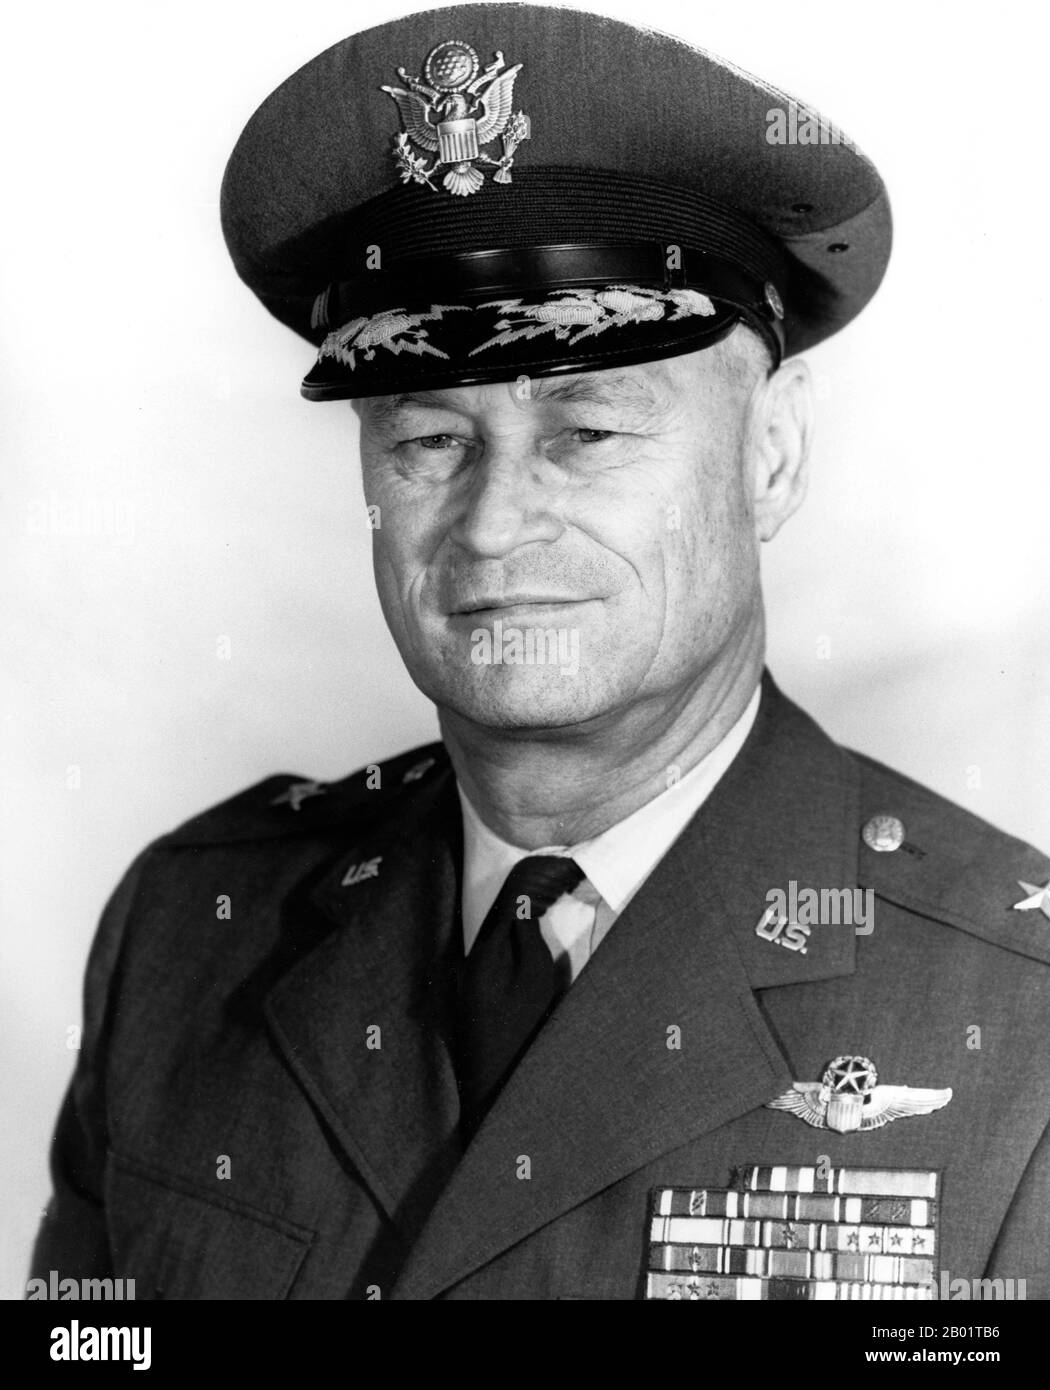 USA: Brigadier General John Allen Hilger (11 January 1909 - 3 February 1982), 1960s.  John Allen Hilger was a brigadier general in the United States Air Force. Born in Sherman, Texas, Hilger graduated from Agricultural and Mechanical College of Texas and was commissioned in the U.S. Army Air Corps in 1934. He was assigned to the 89th Reconnaissance Squadron as commander in May 1940; flying North American B-25 Mitchell bombers on anti-submarine patrols from December 1941. He was selected by Lieutenant Colonel Jimmy Doolittle for what became known as the Doolittle Raid, bombing Nagoya in 1942. Stock Photo